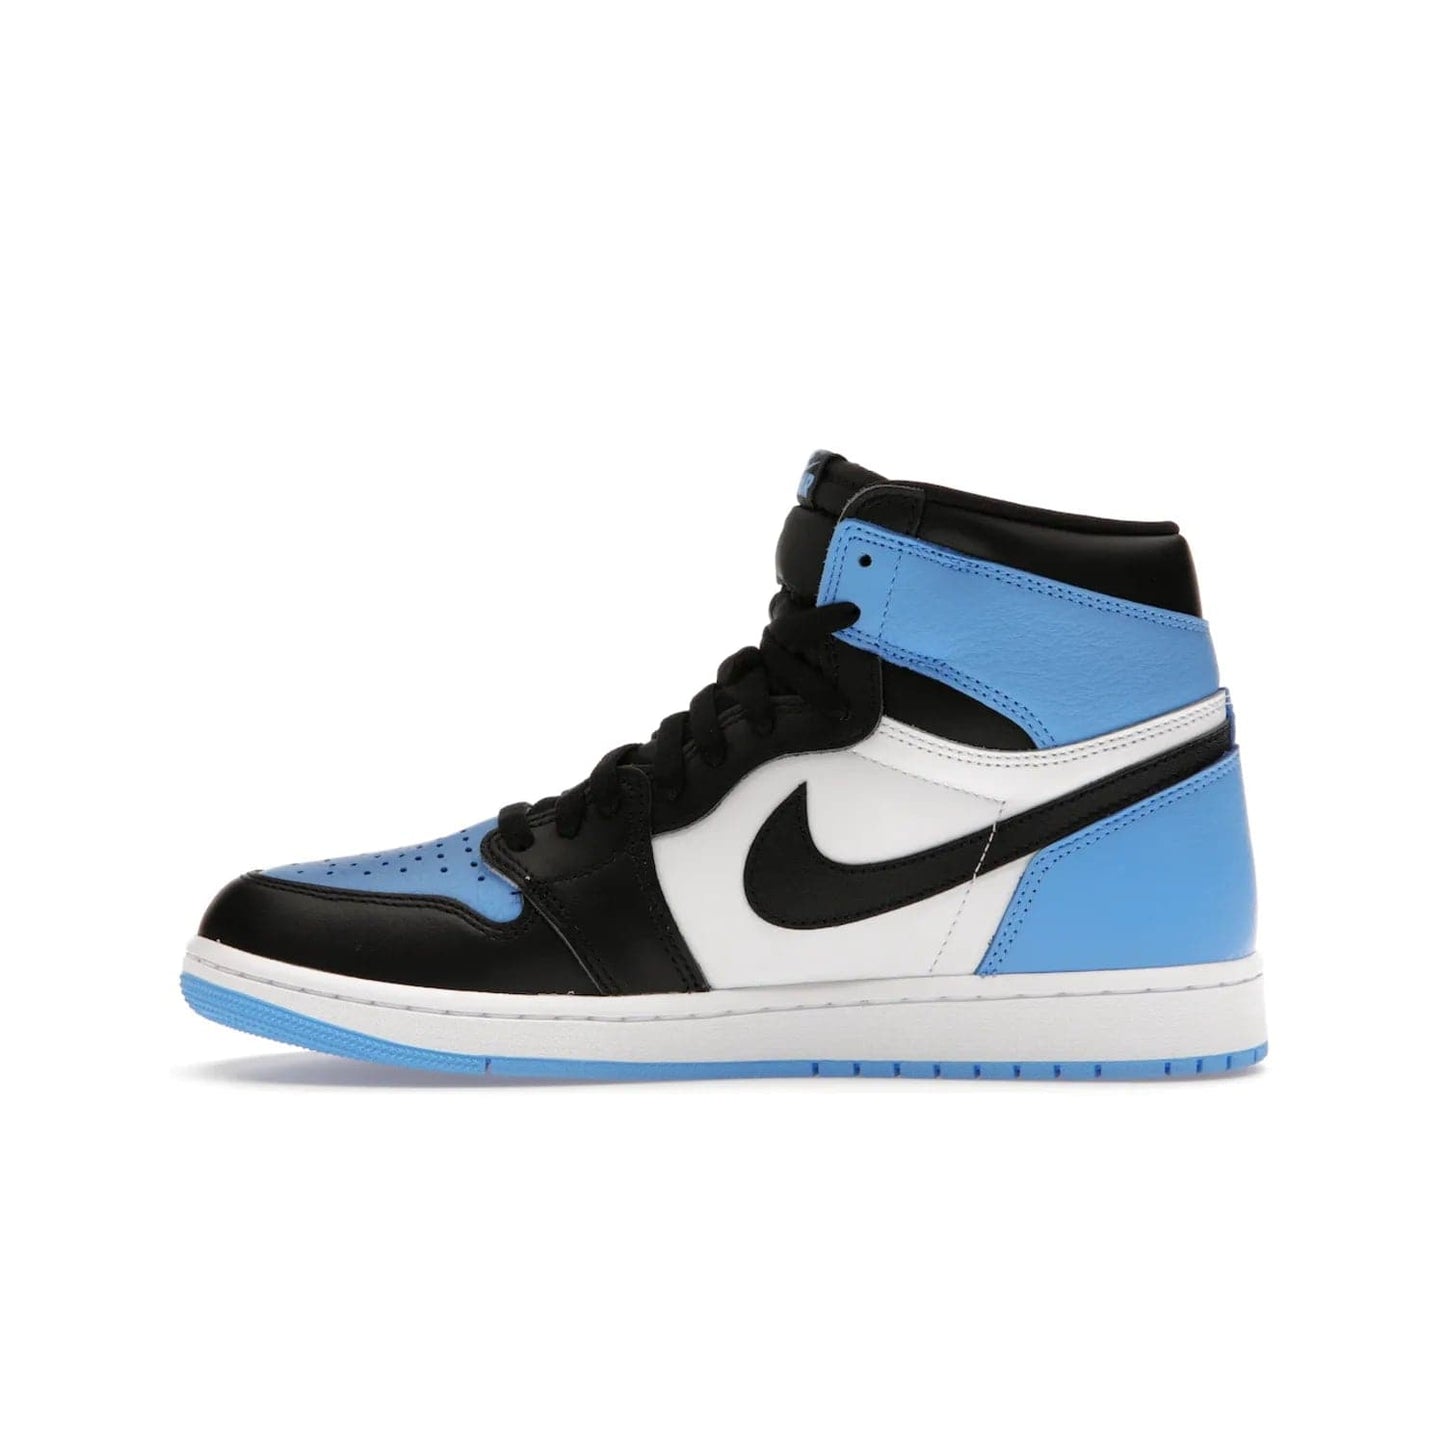 Jordan 1 Retro High OG UNC Toe - Image 19 - Only at www.BallersClubKickz.com - Jordan 1 High OG UNC Toe is a fashionable, high-quality sneaker featuring University Blue, Black White and White. Releasing July 22, 2023, it's the perfect pick up for sneakerheads.